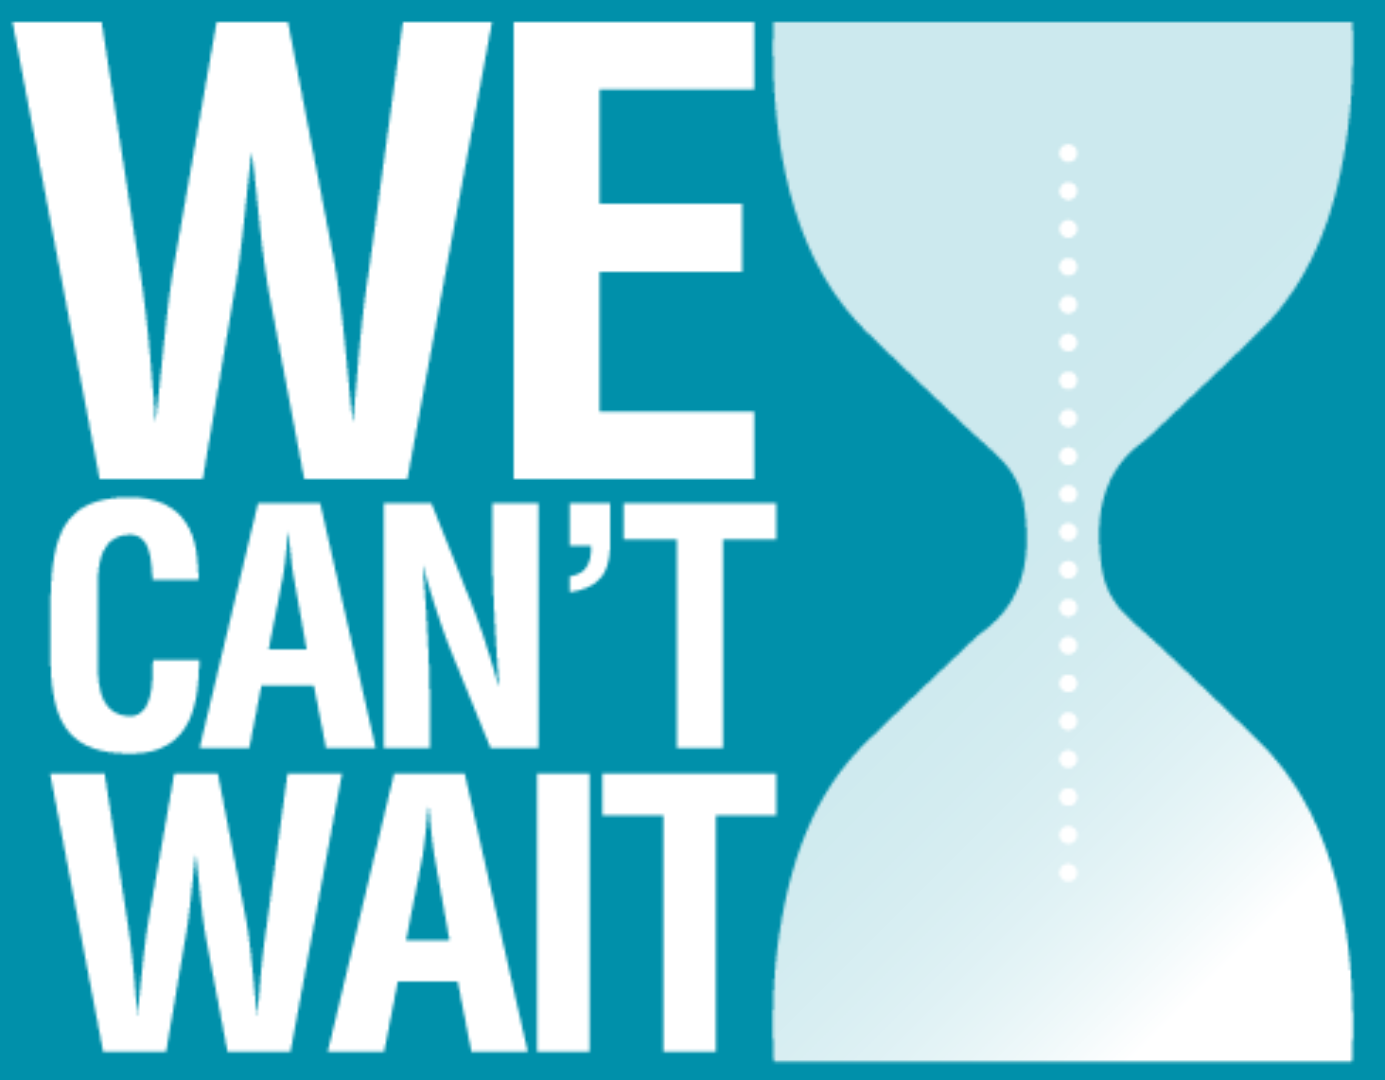 We can't wait logo from Lymphoma Coalition for World Lymphoma Awareness Day